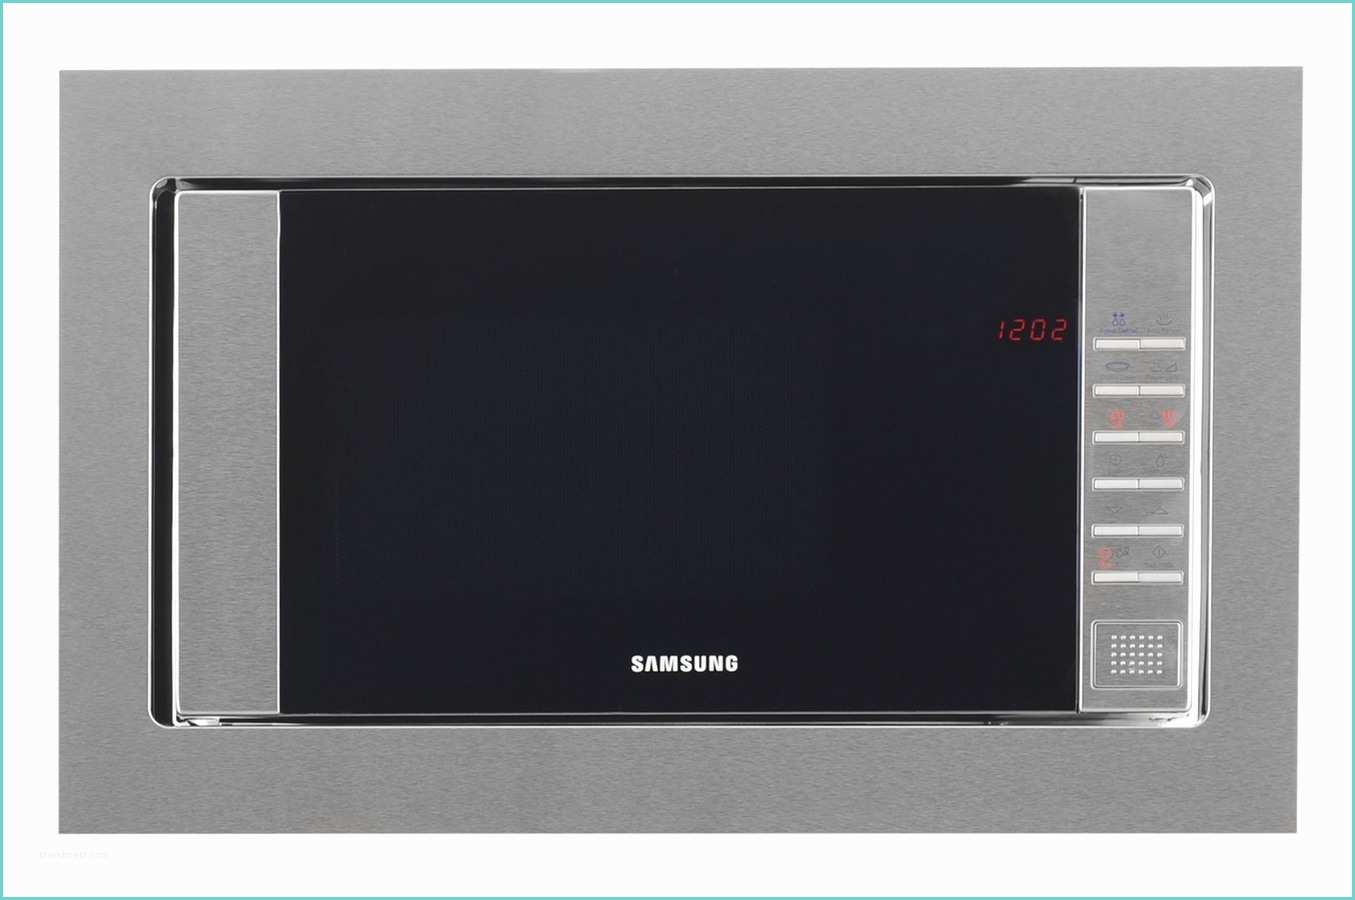 Four Micro Onde Encastrable Micro Ondes Gril Encastrable Samsung Fg87sst Inox